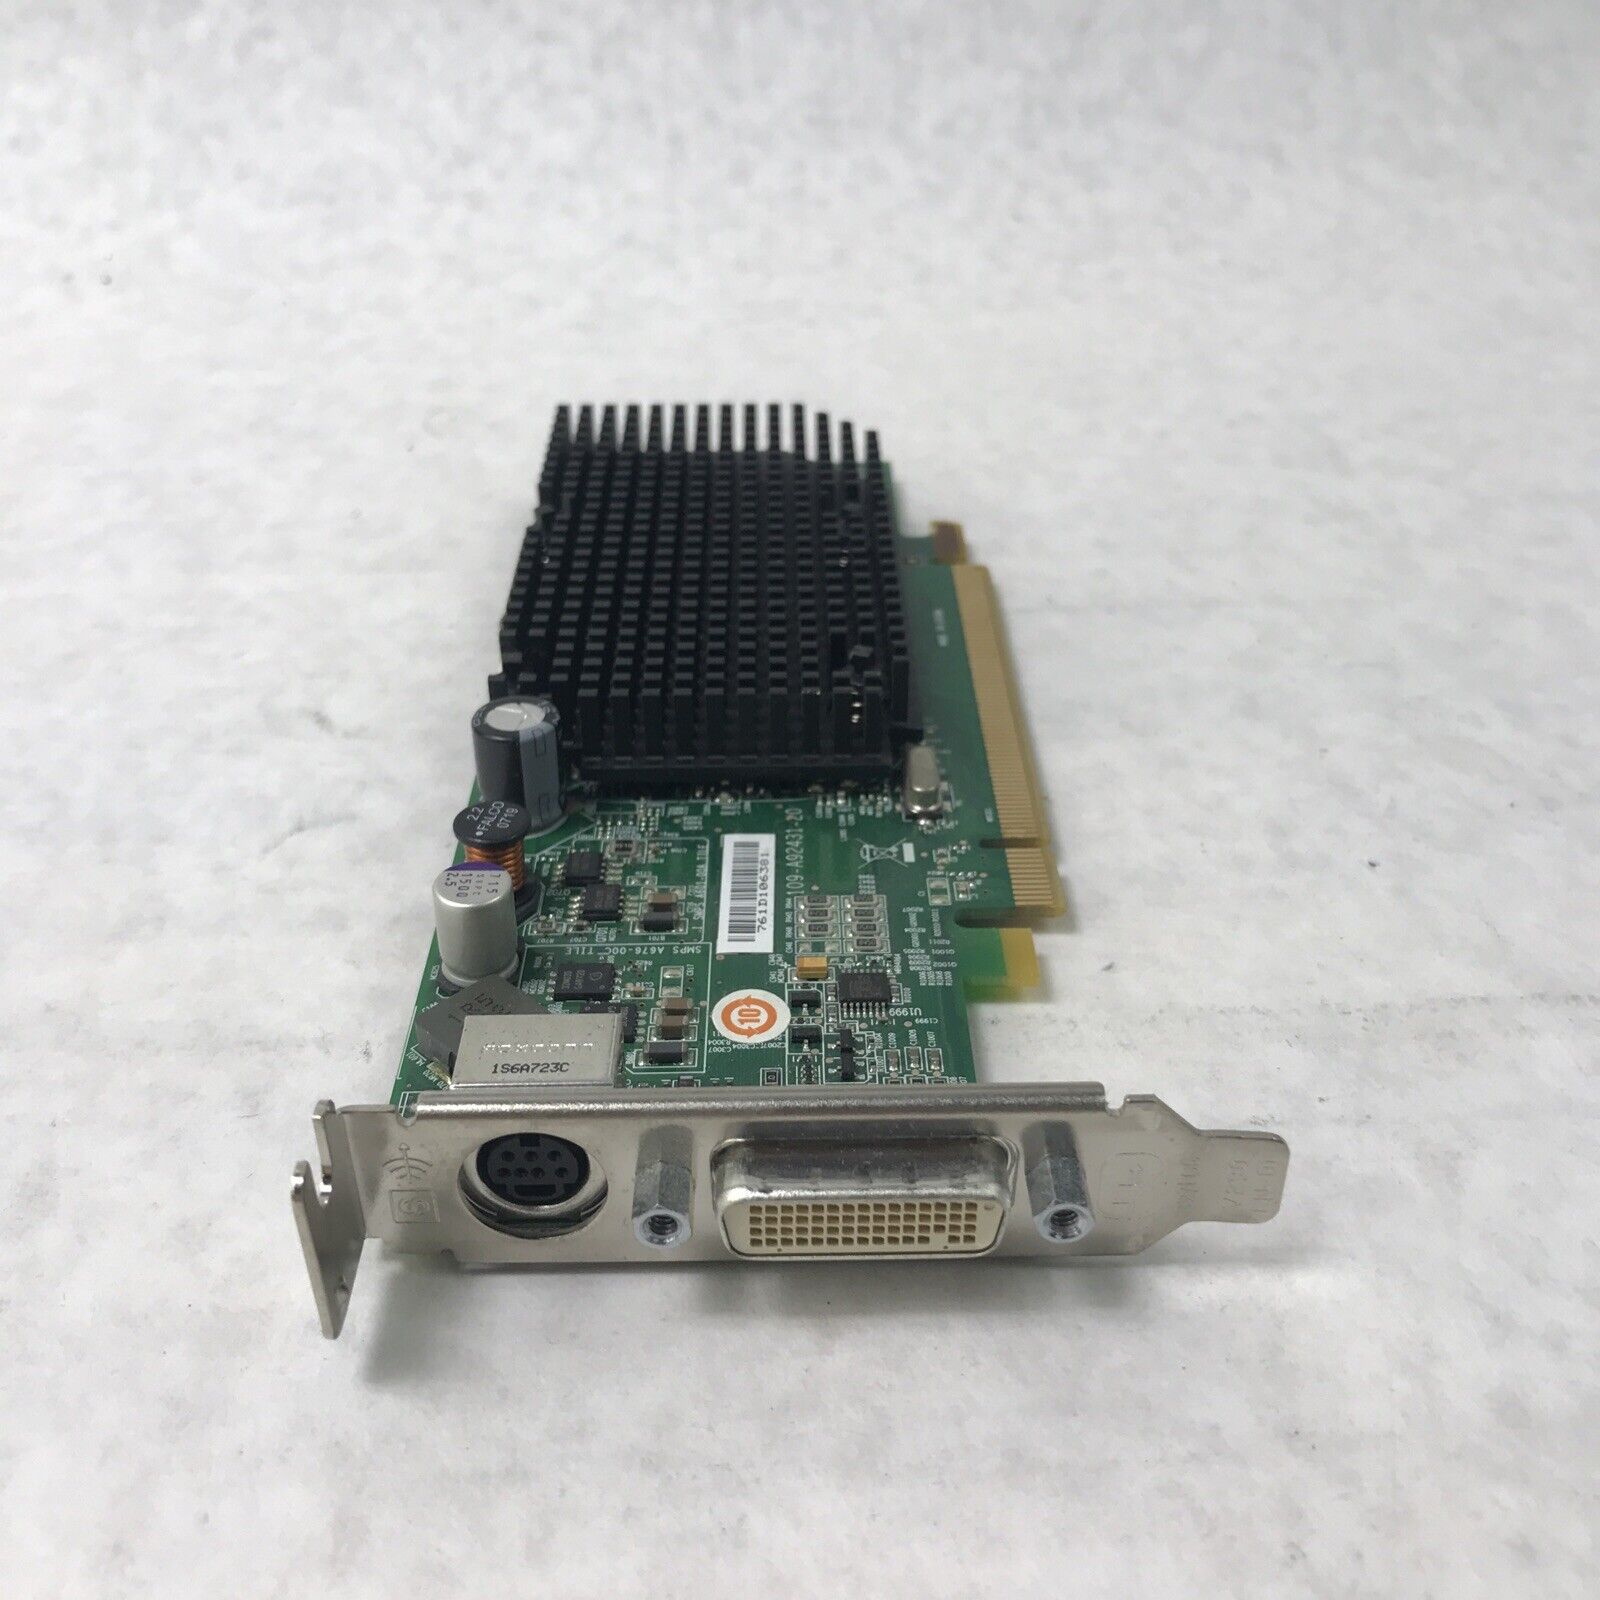 (Lot of 3) Dell ATI Radeon PCIe 256MB JJ461 KT154 Video Card (Tested and Working